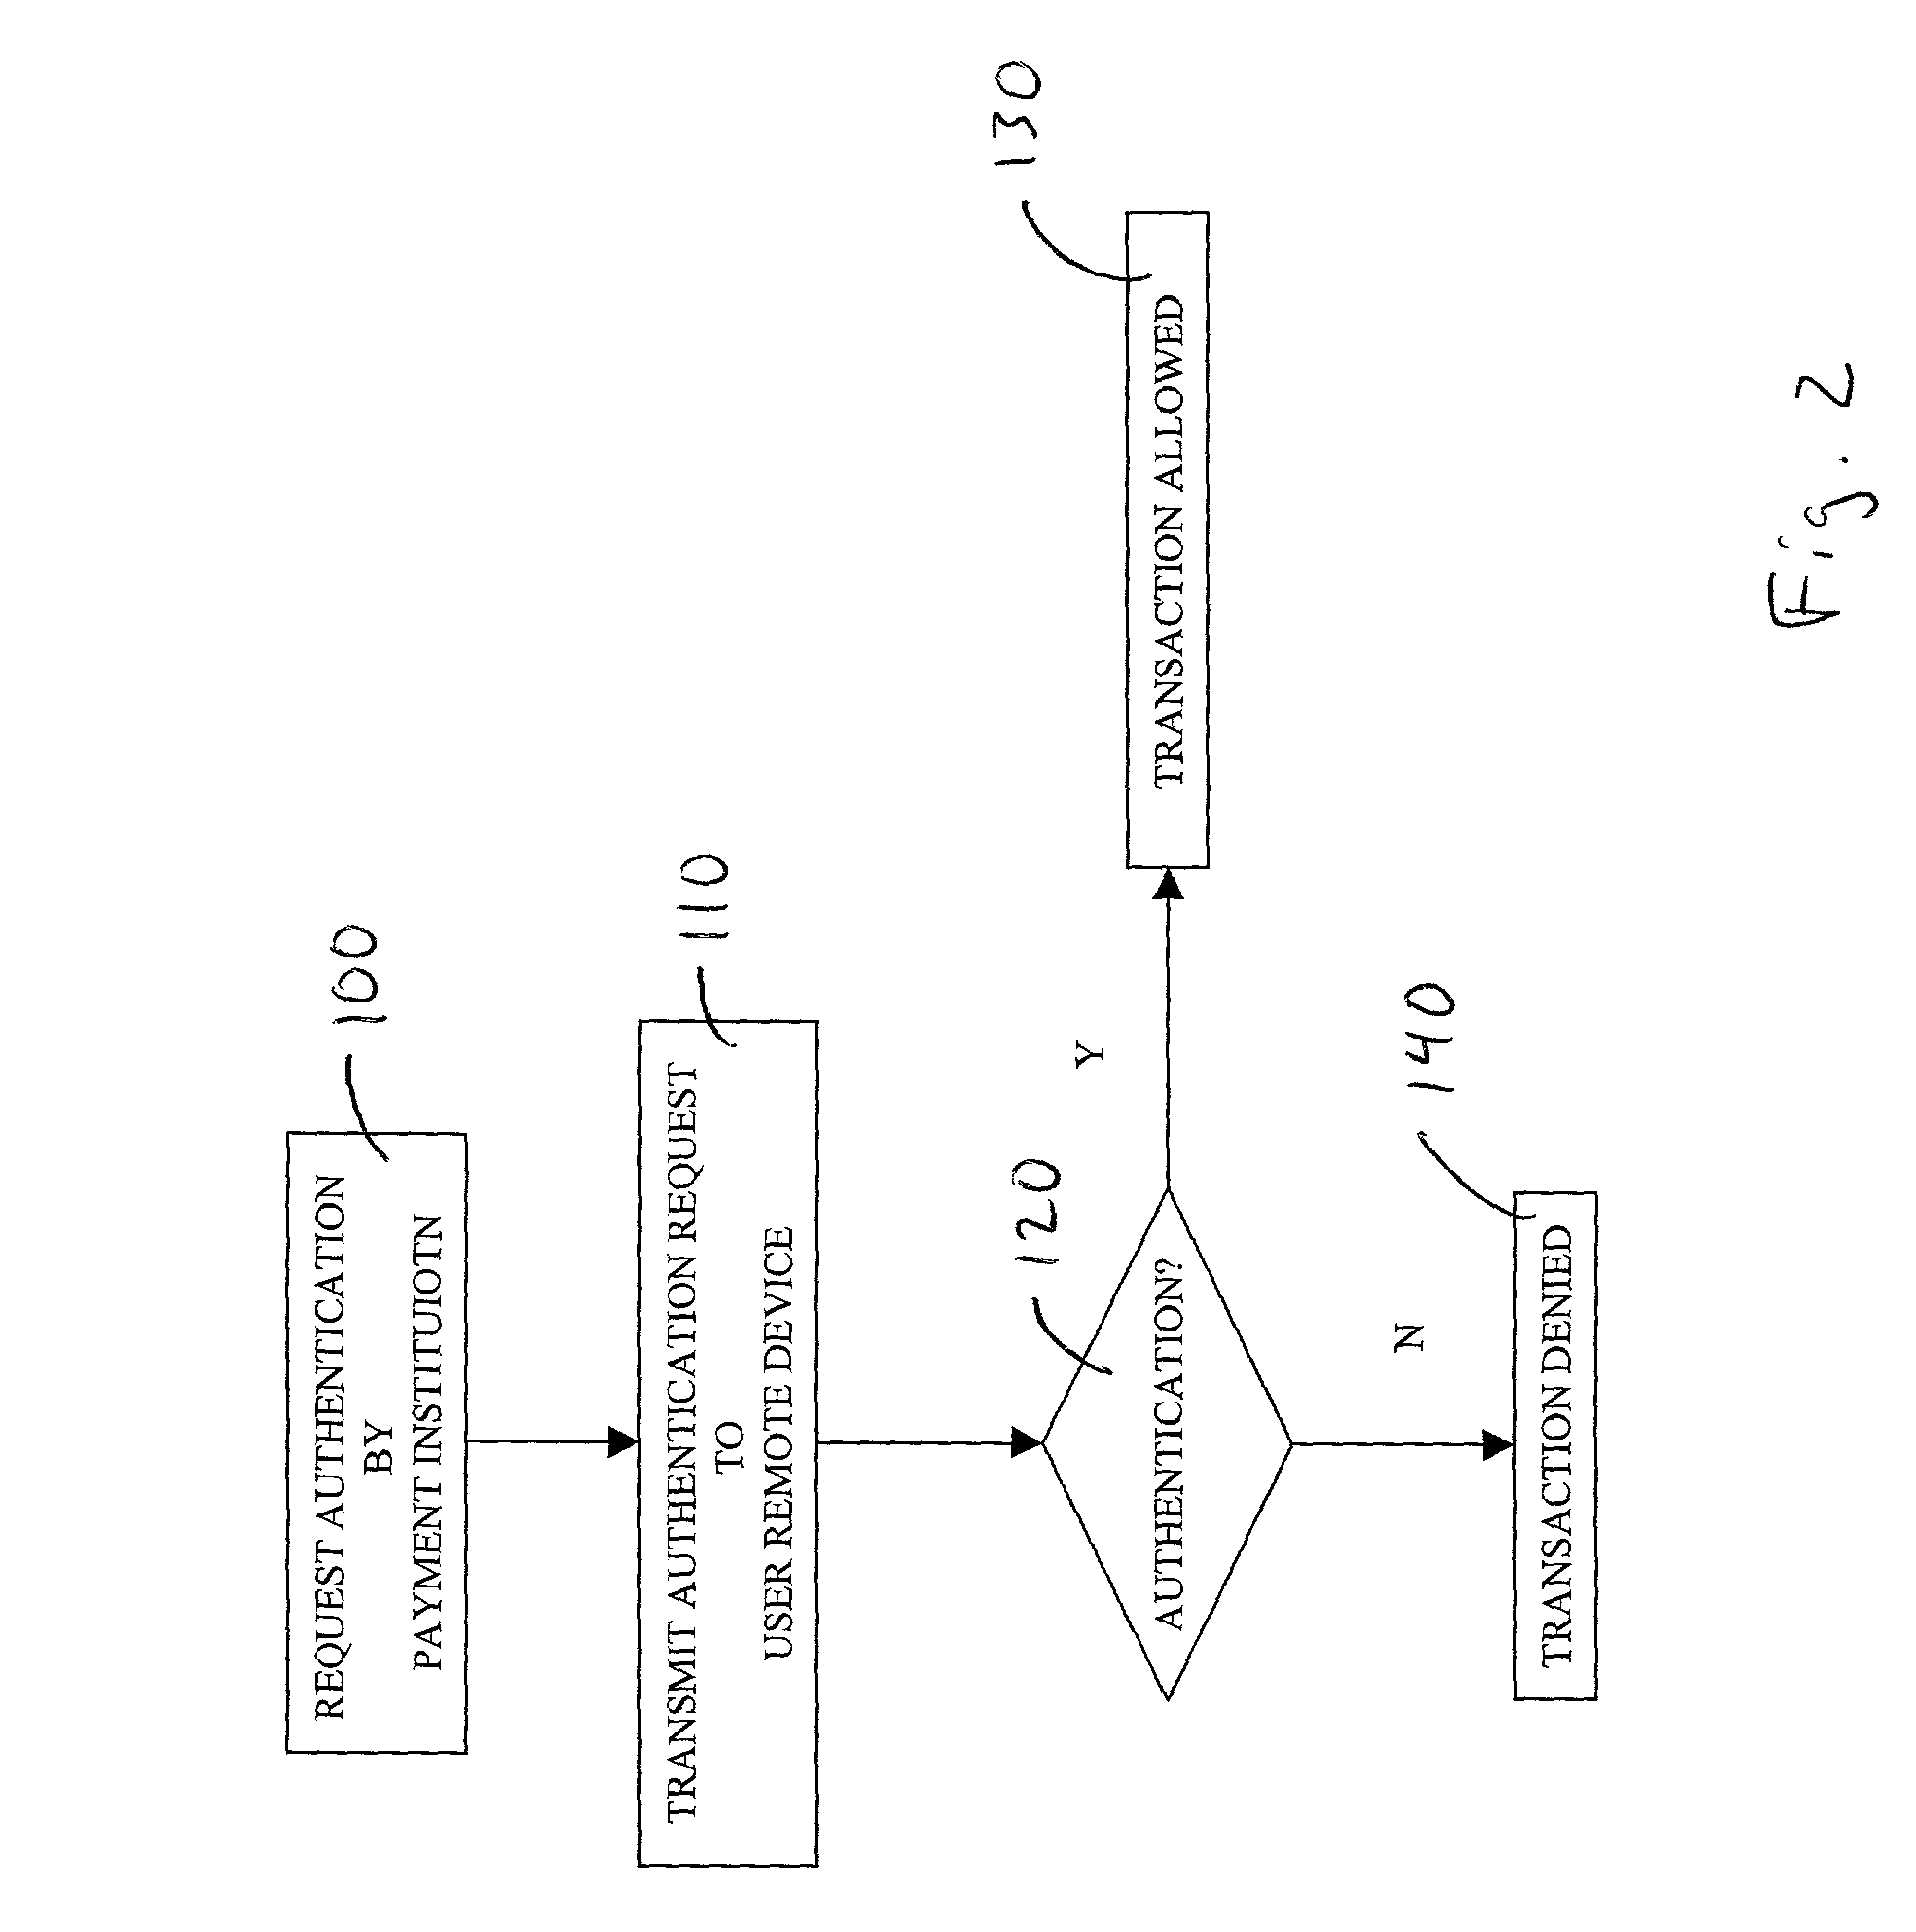 Transaction authentication system and method